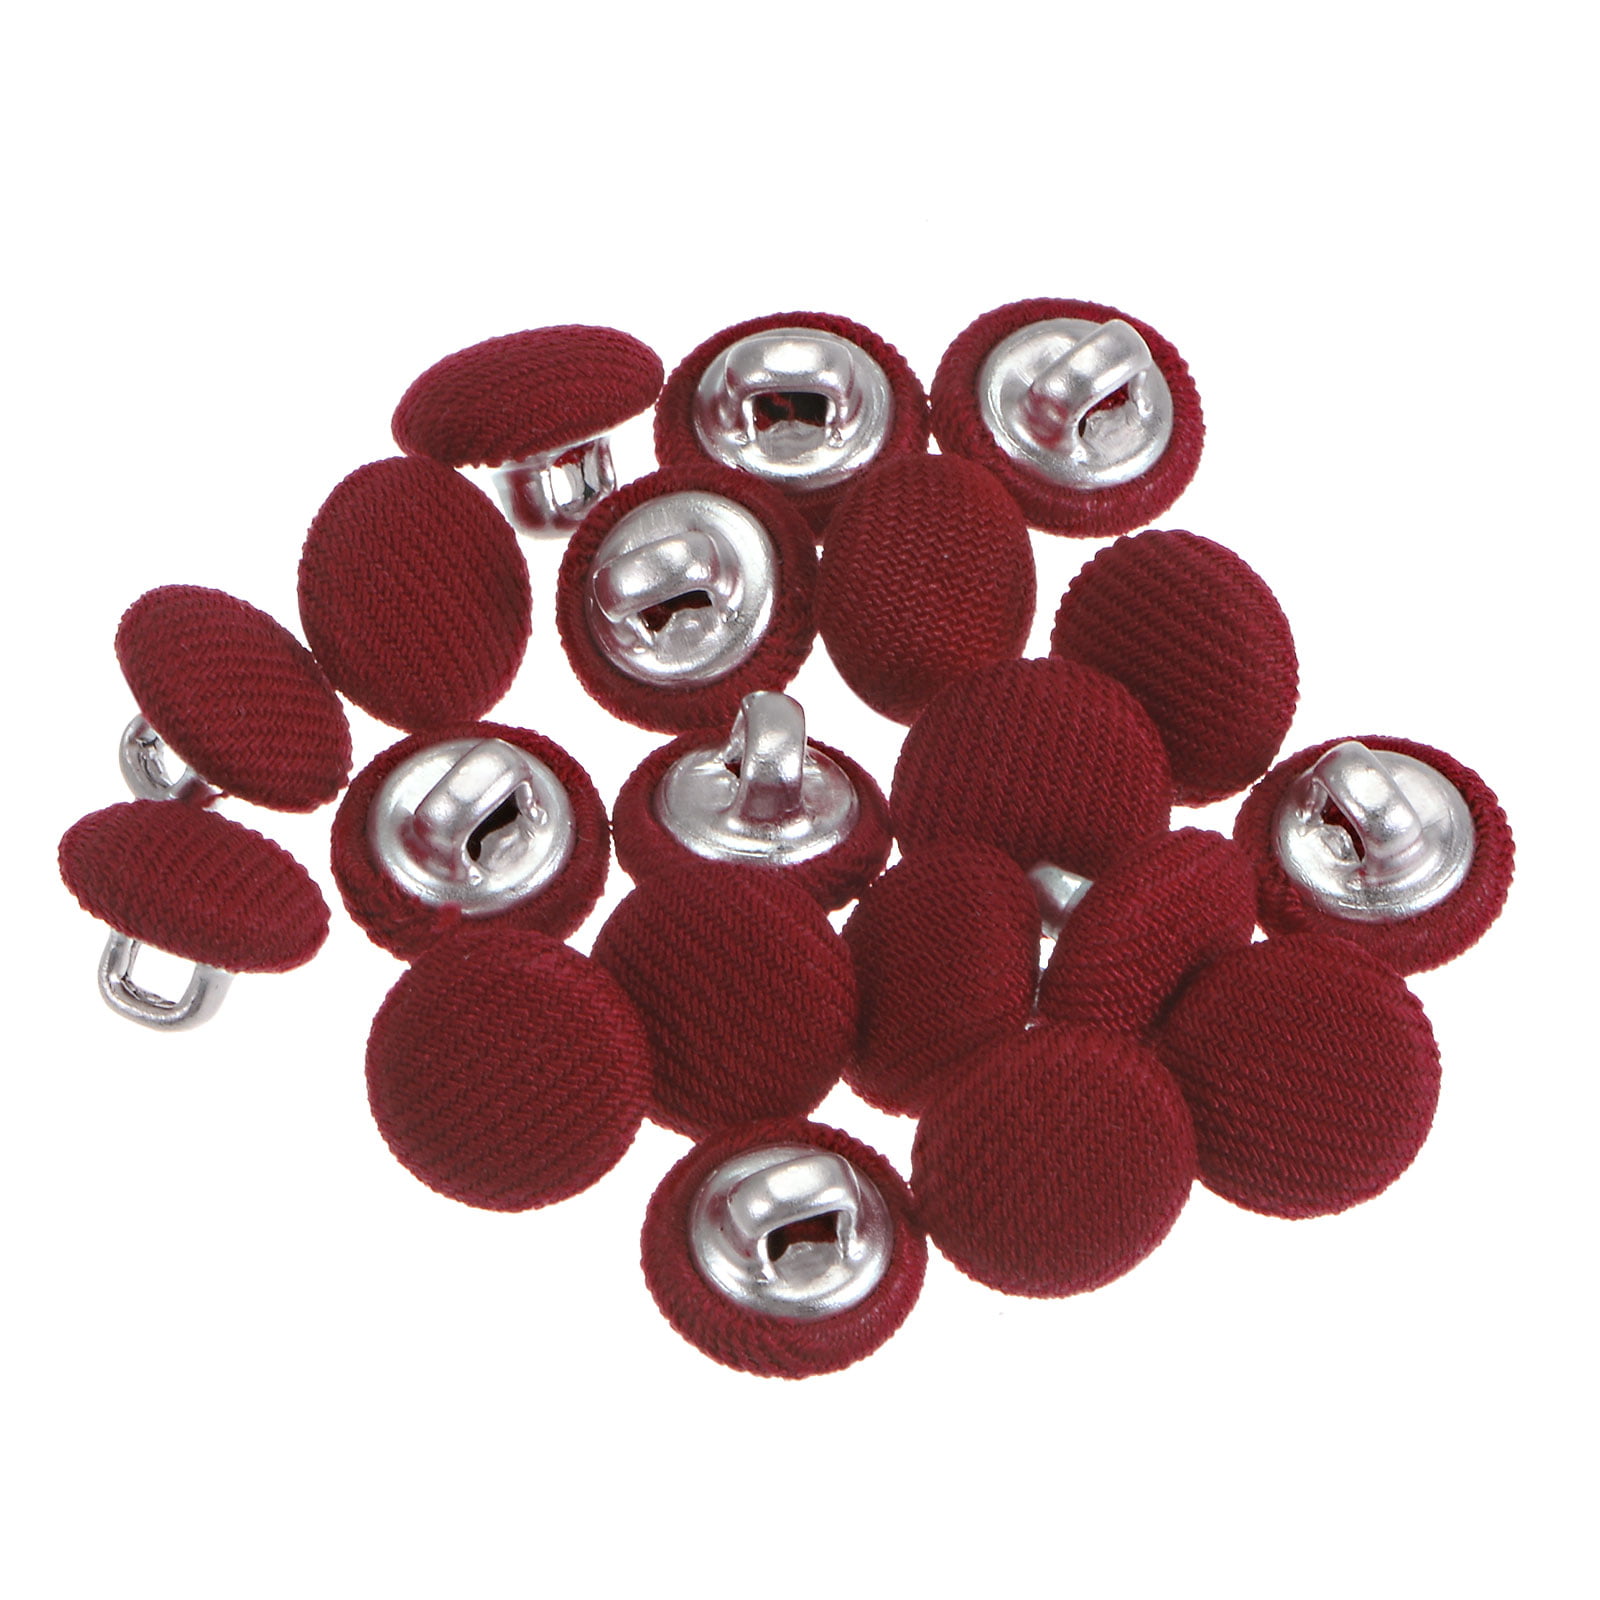 12 Pcs Red Sewing Buttons 4 Hole Round Buttons 0.4 inch Button for Crafts  16L Plastic Buttons for Sewing 10mm Coral Buttons for Pants Blouse Shirt